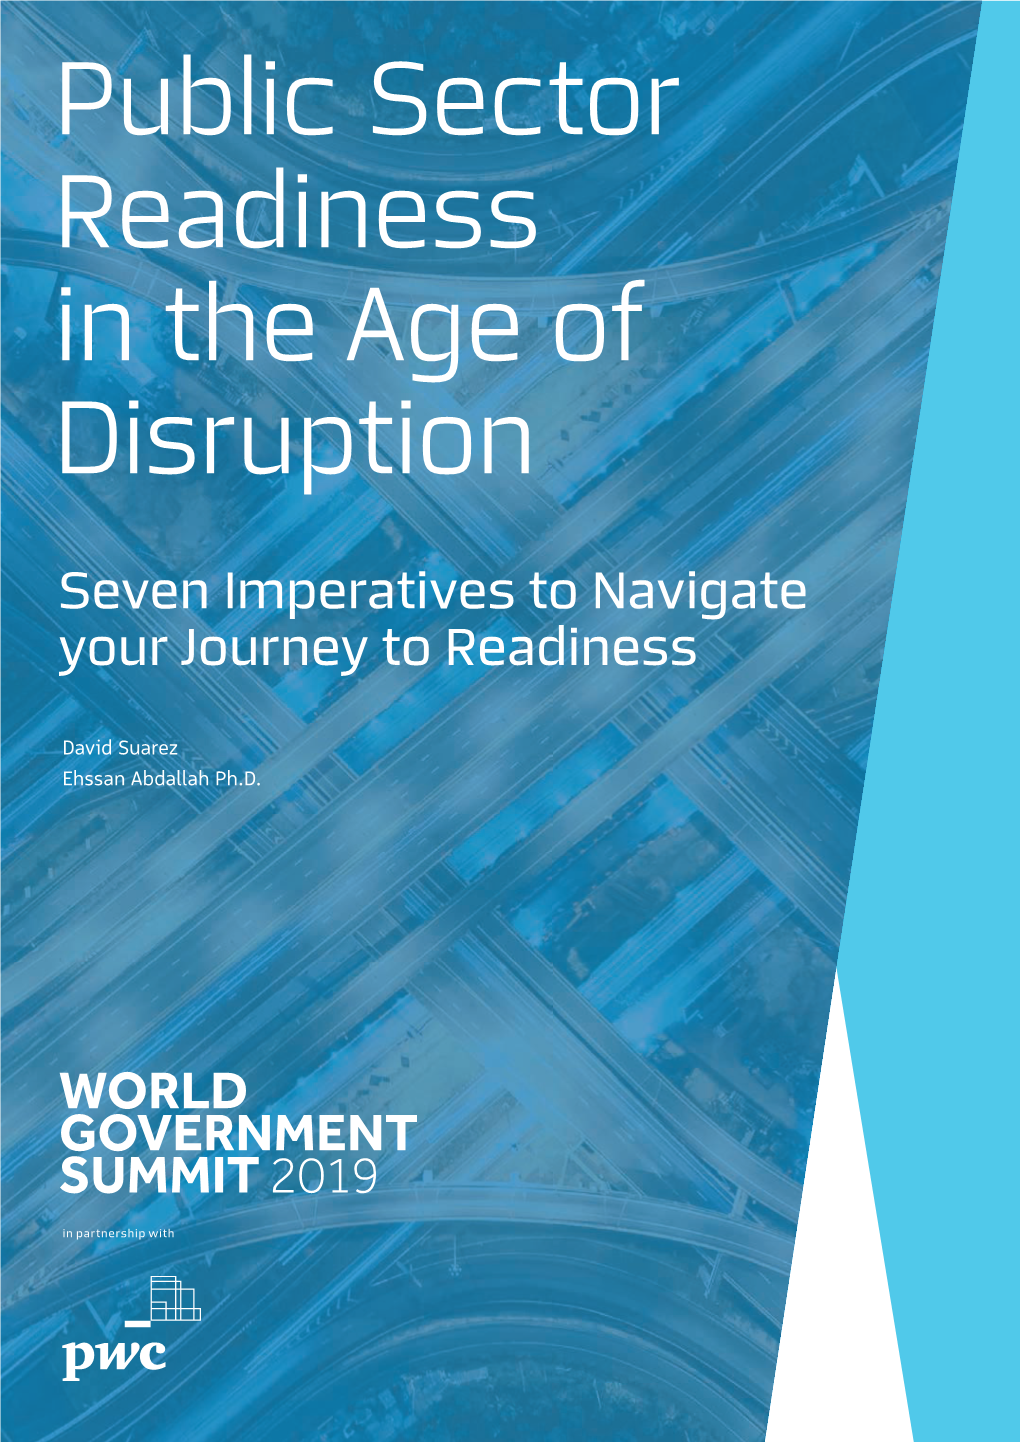 Public Sector Readiness in the Age of Disruption